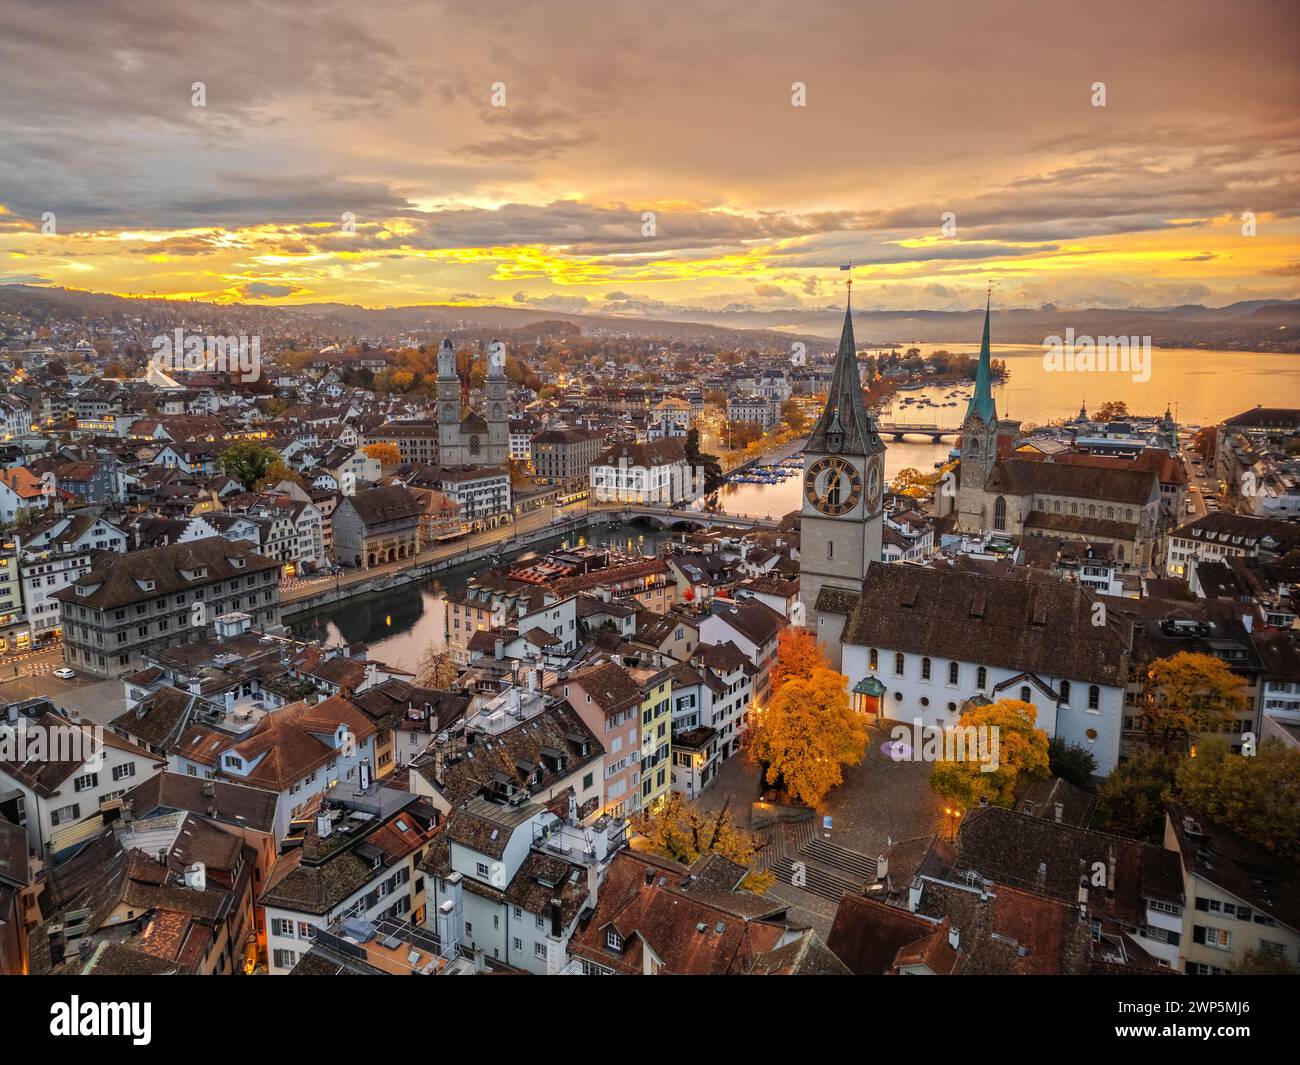 Zurich, Switzerland old town skyline over the Limmat River on an autumn morning. Stock Photo